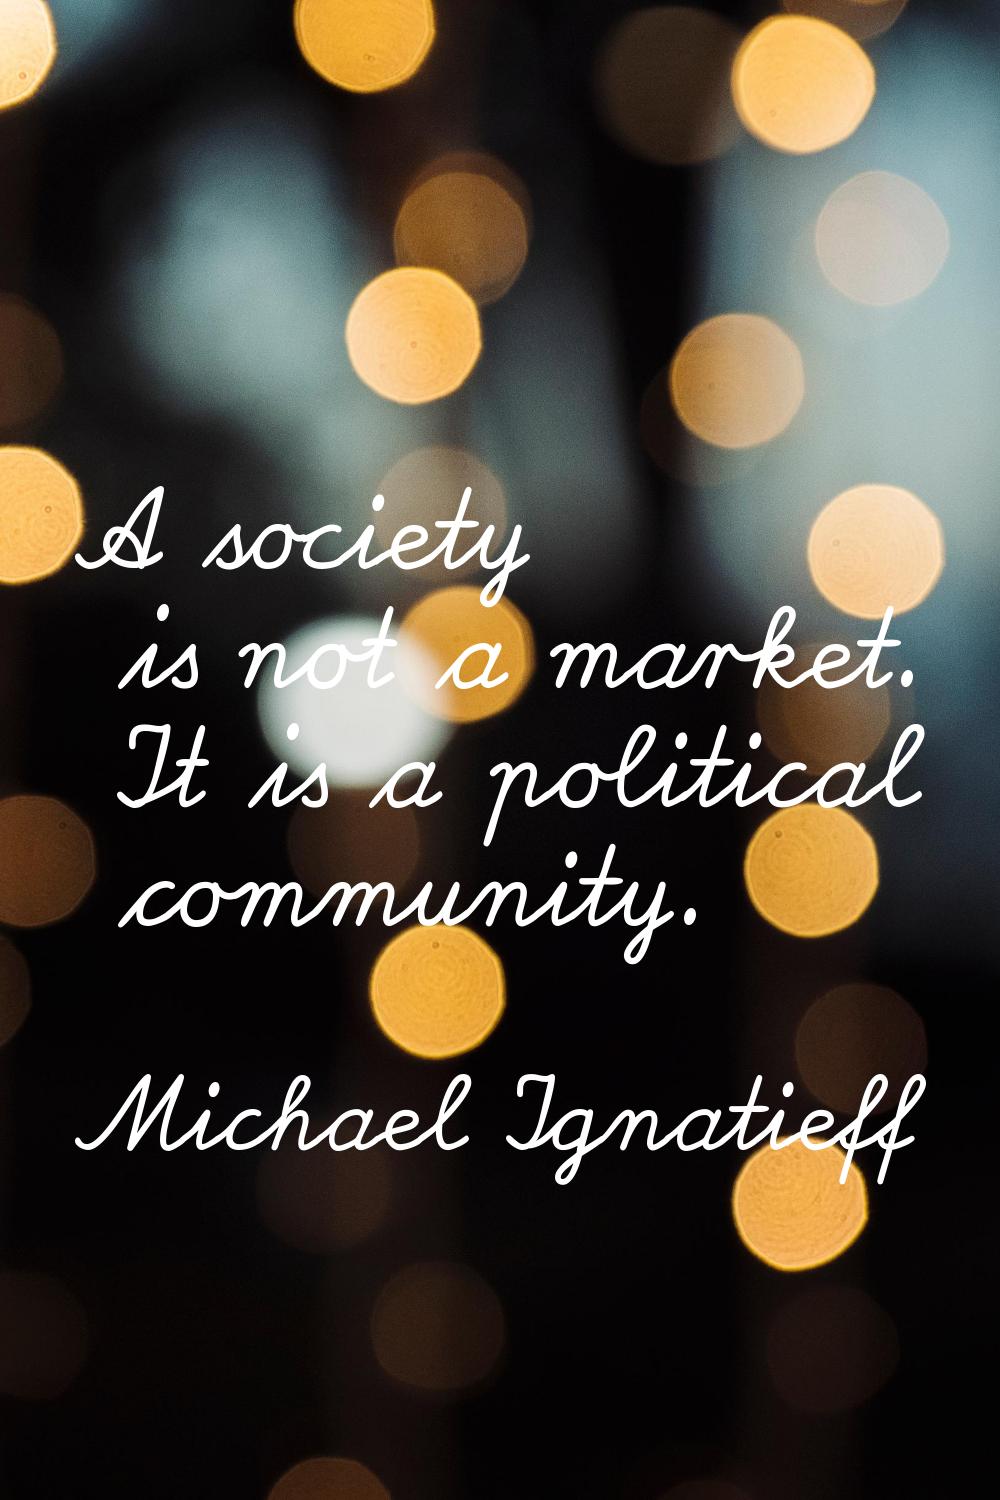 A society is not a market. It is a political community.